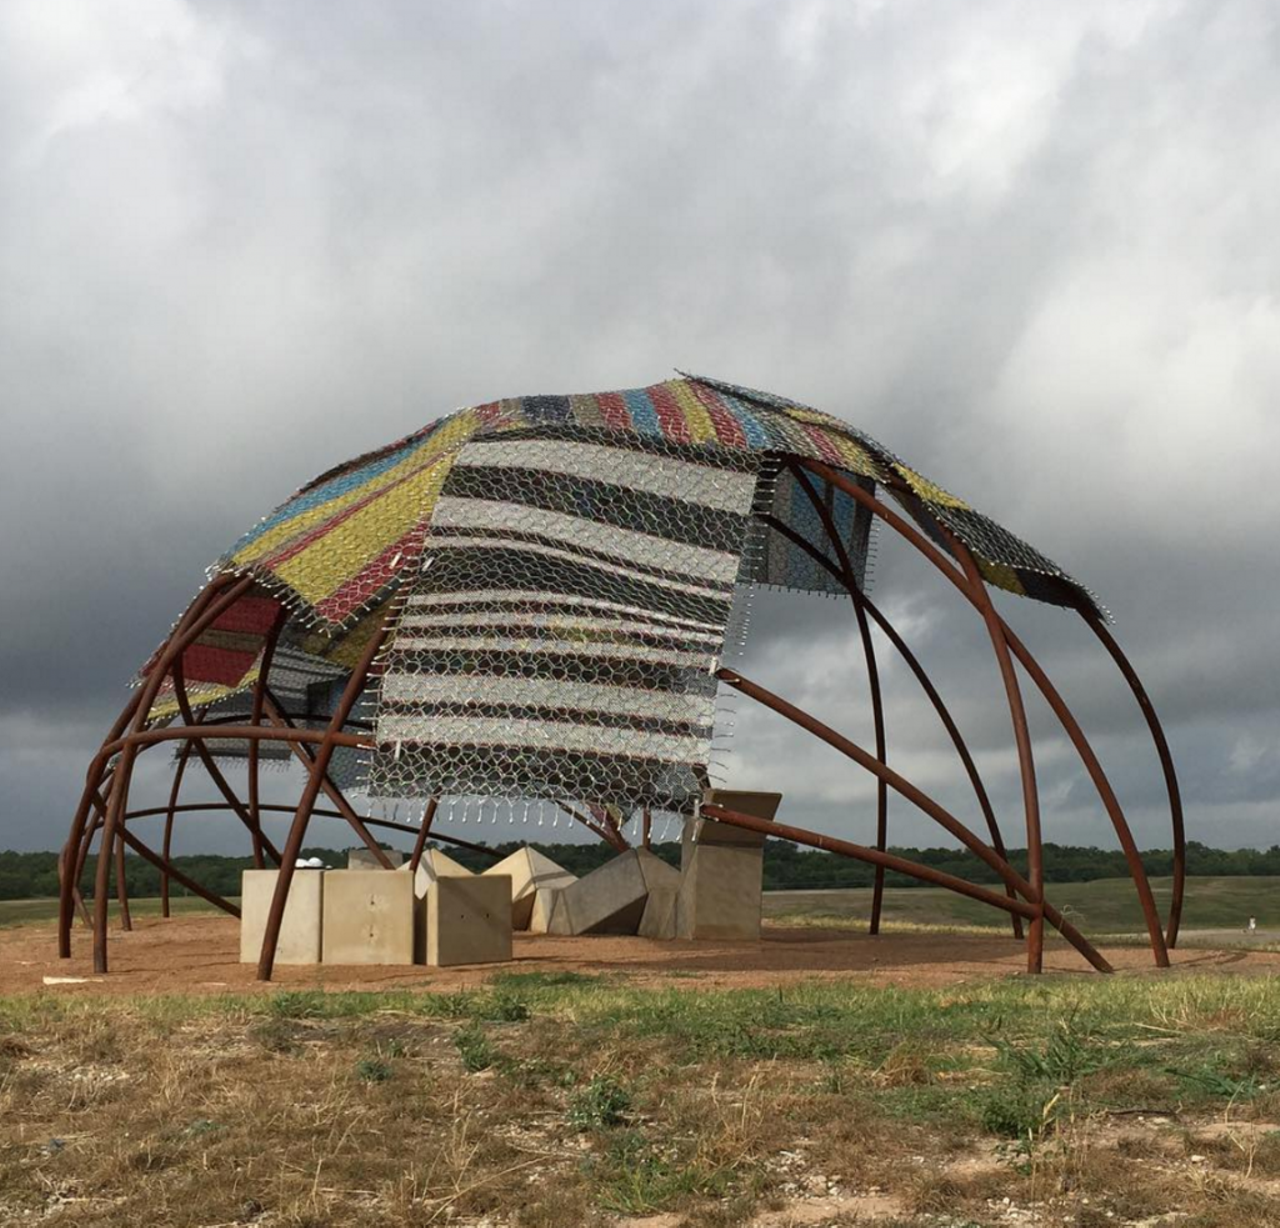 Wickiup Overlook
4700 Old Pearsall Rd
Artist: Buster Simpson, 2016
In the middle of San Antonio's newest Pearsall Park in southwest San Antonio, Wickiup Overlook is an embellished shade structure complete with seating that also doubles as an art installation.
Instagram/sachartermoms